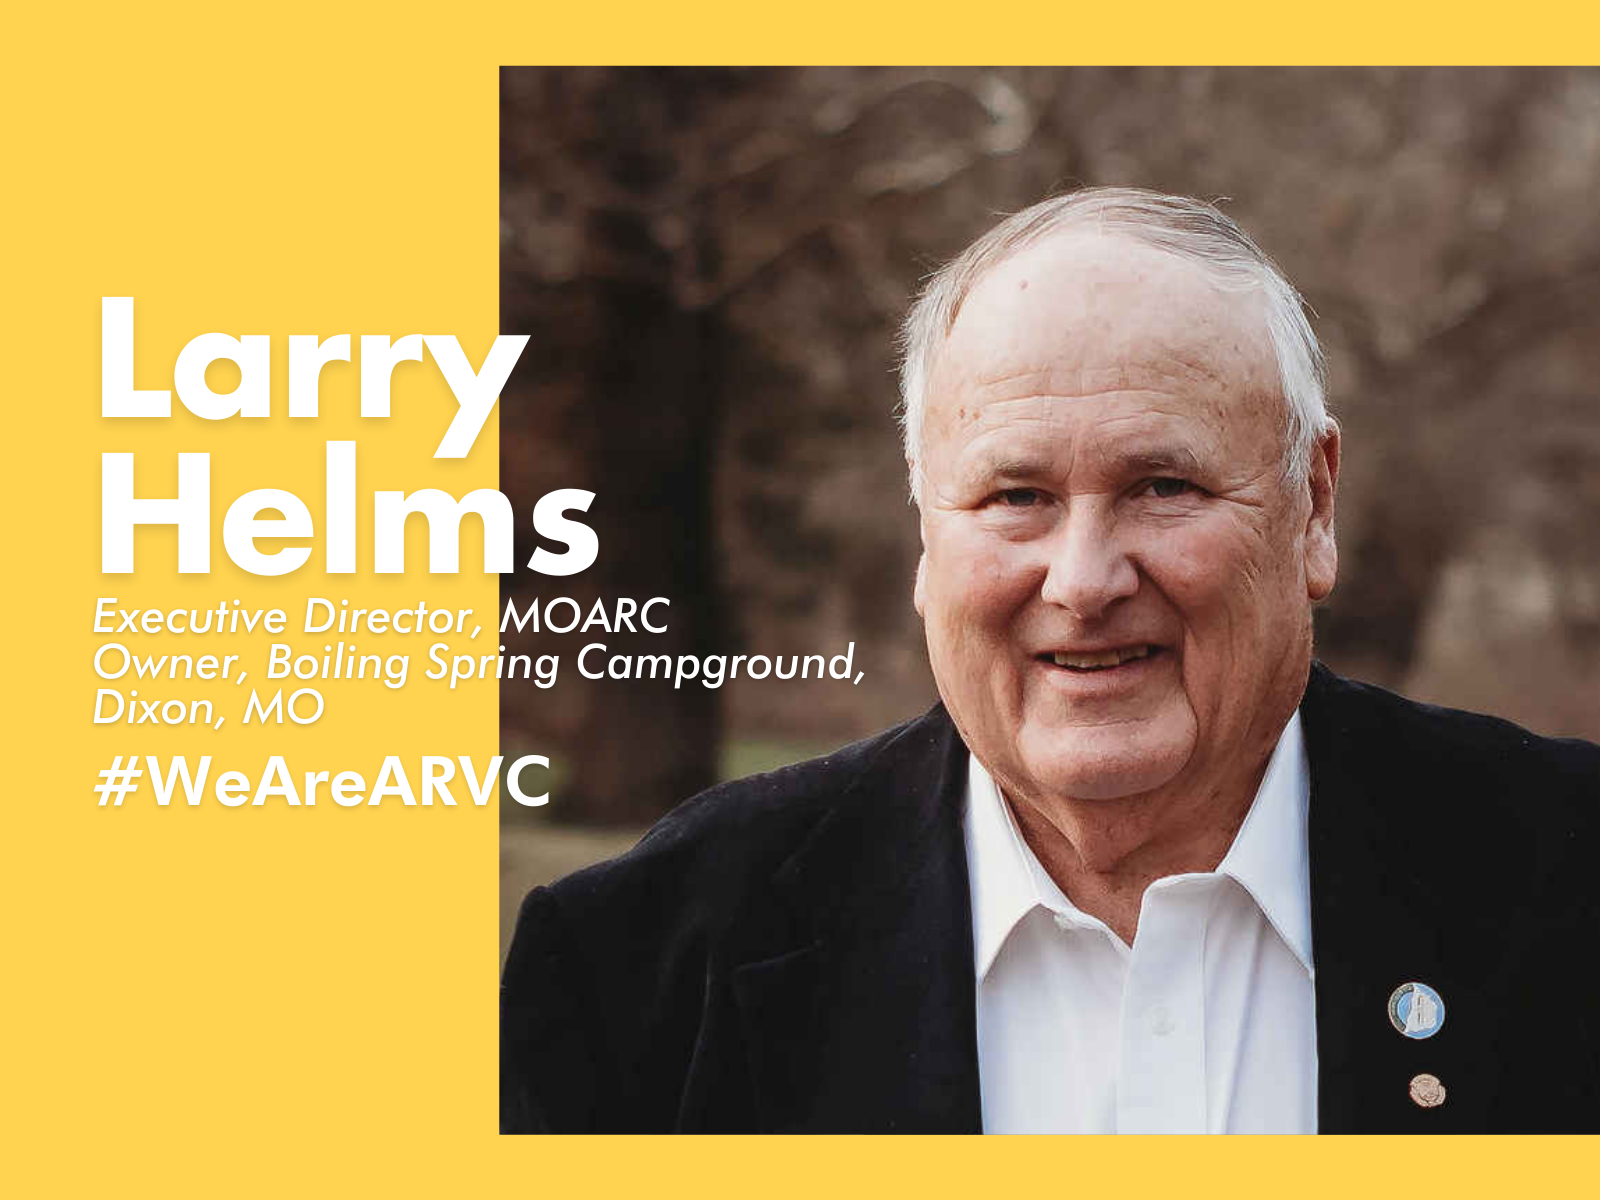 Larry Helms Owner, Boiling Spring Campground, Dixon, Mo.  Executive Director, Missouri Association of RV Parks and Campgrounds (MOARC)